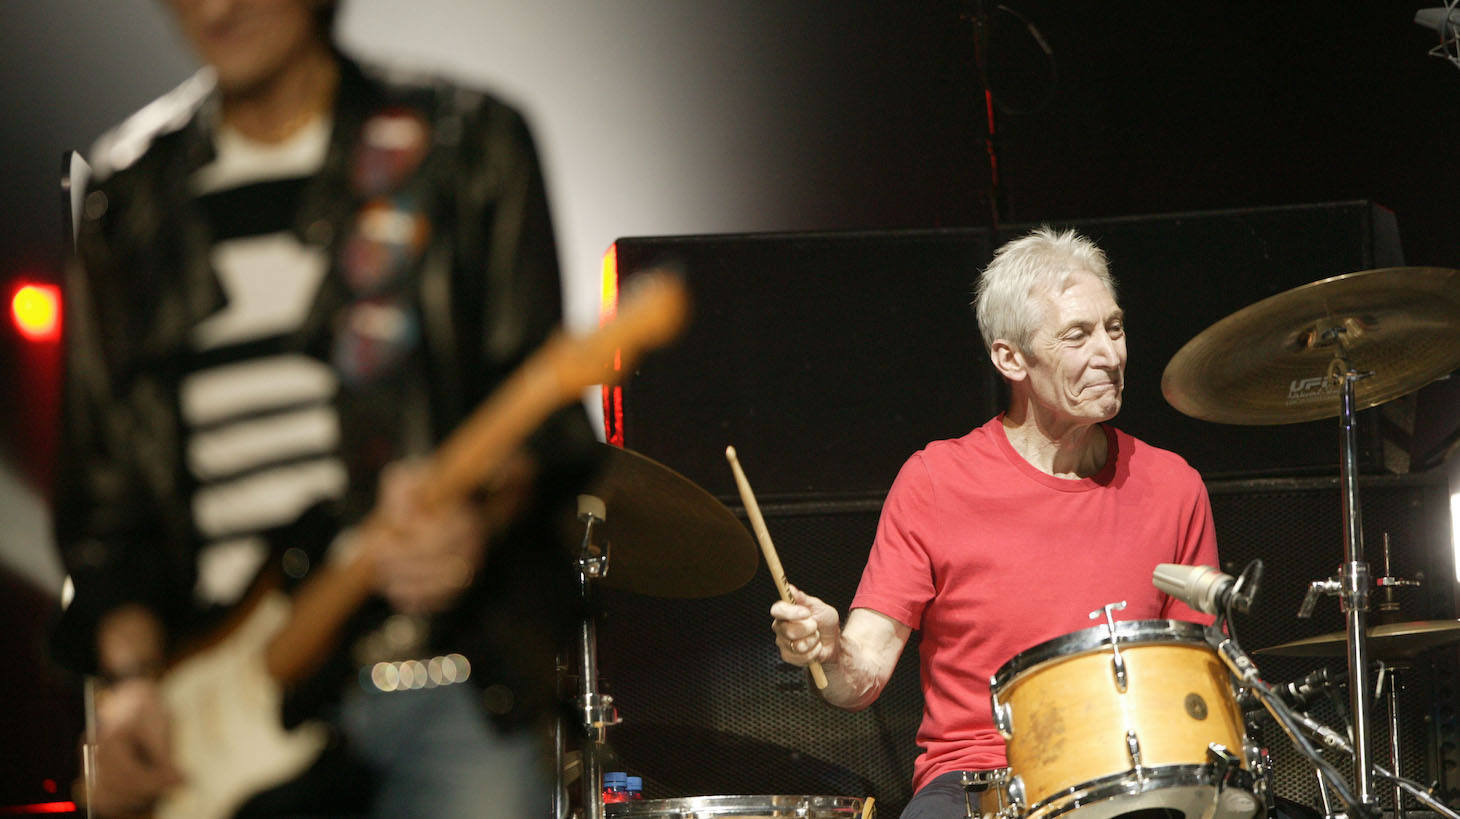 MUNICH, GERMANY - JUNE 4: Drummer Charlie Watts Perform at the opening night of the European leg of The Rolling Stones Forty Licks Tour at the Olimpiahalle Spiridon on June 4, 2003 in Munich, Germany. (Photo by Getty Images)